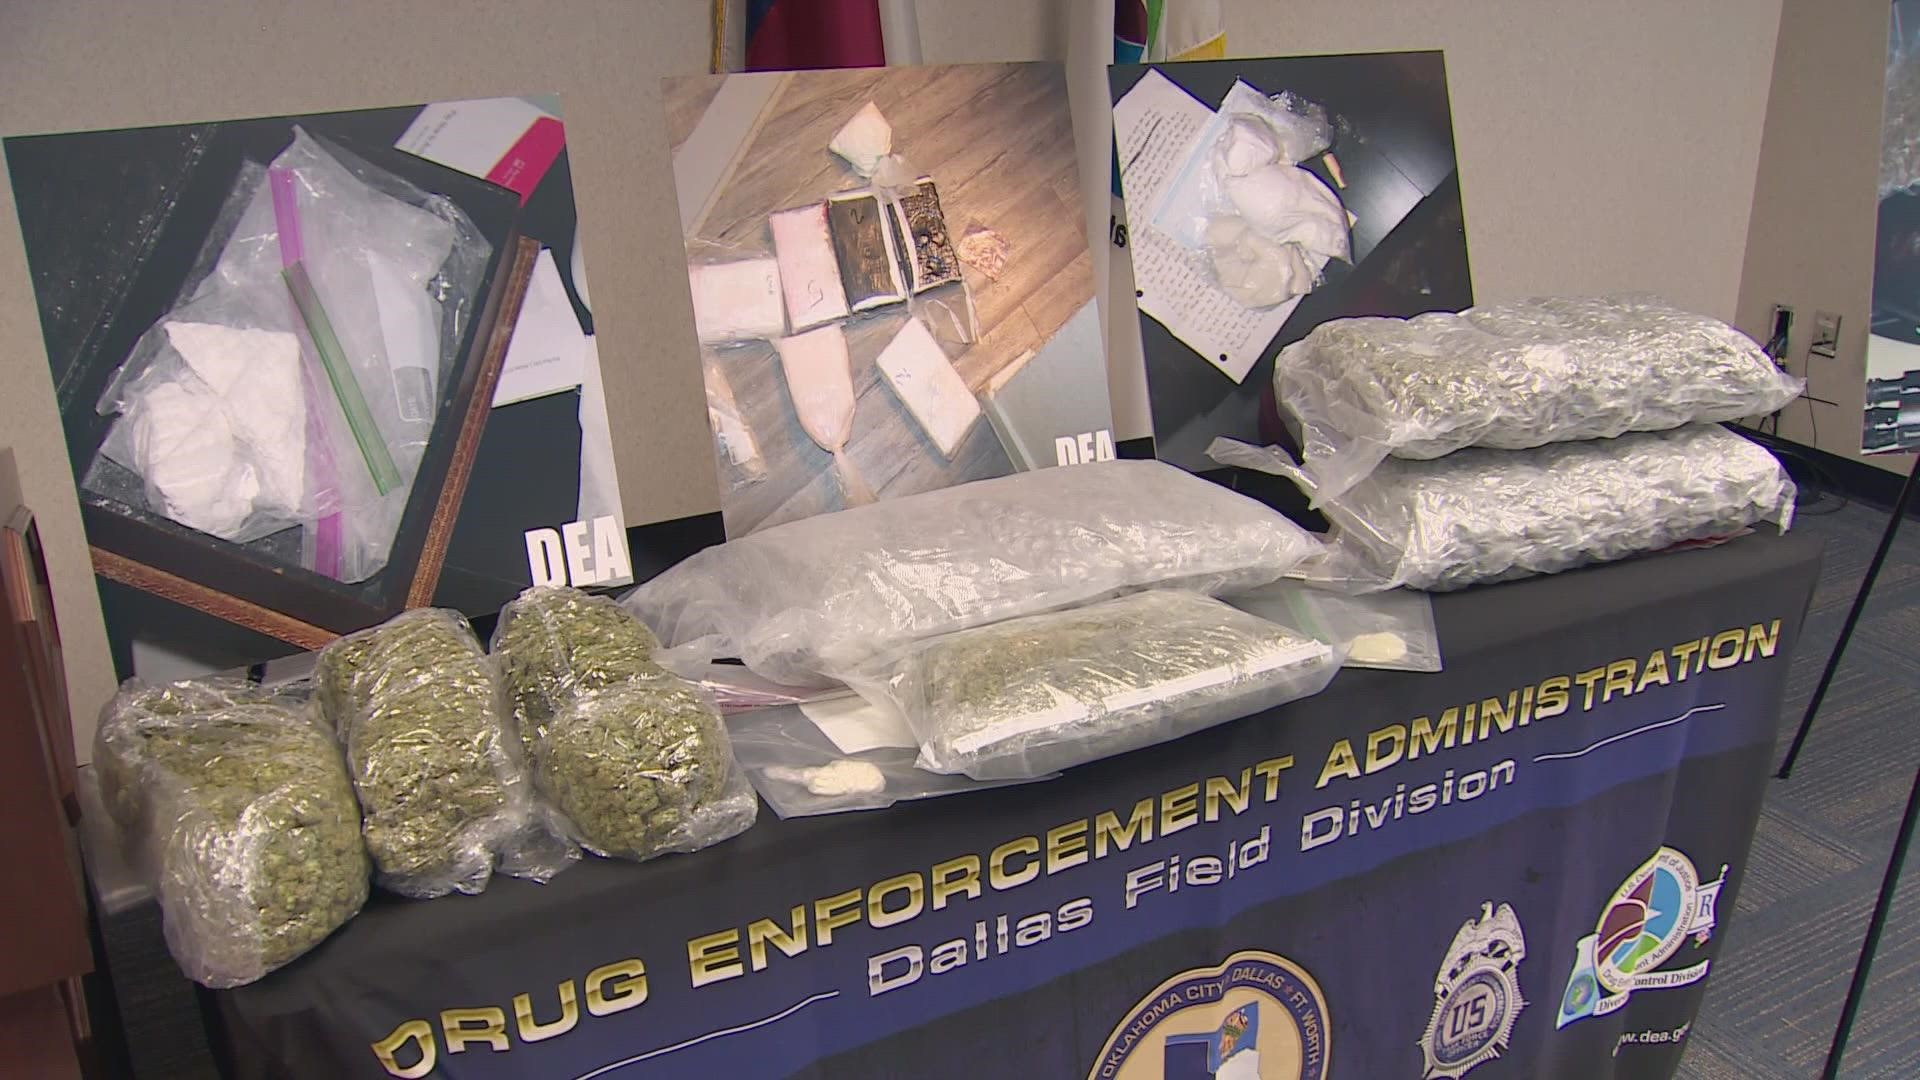 The DEA announced a large drug bust in a North Dallas neighborhood. They arrested 21 gang members and recovered 200 pounds of cocaine and over 40 weapons.